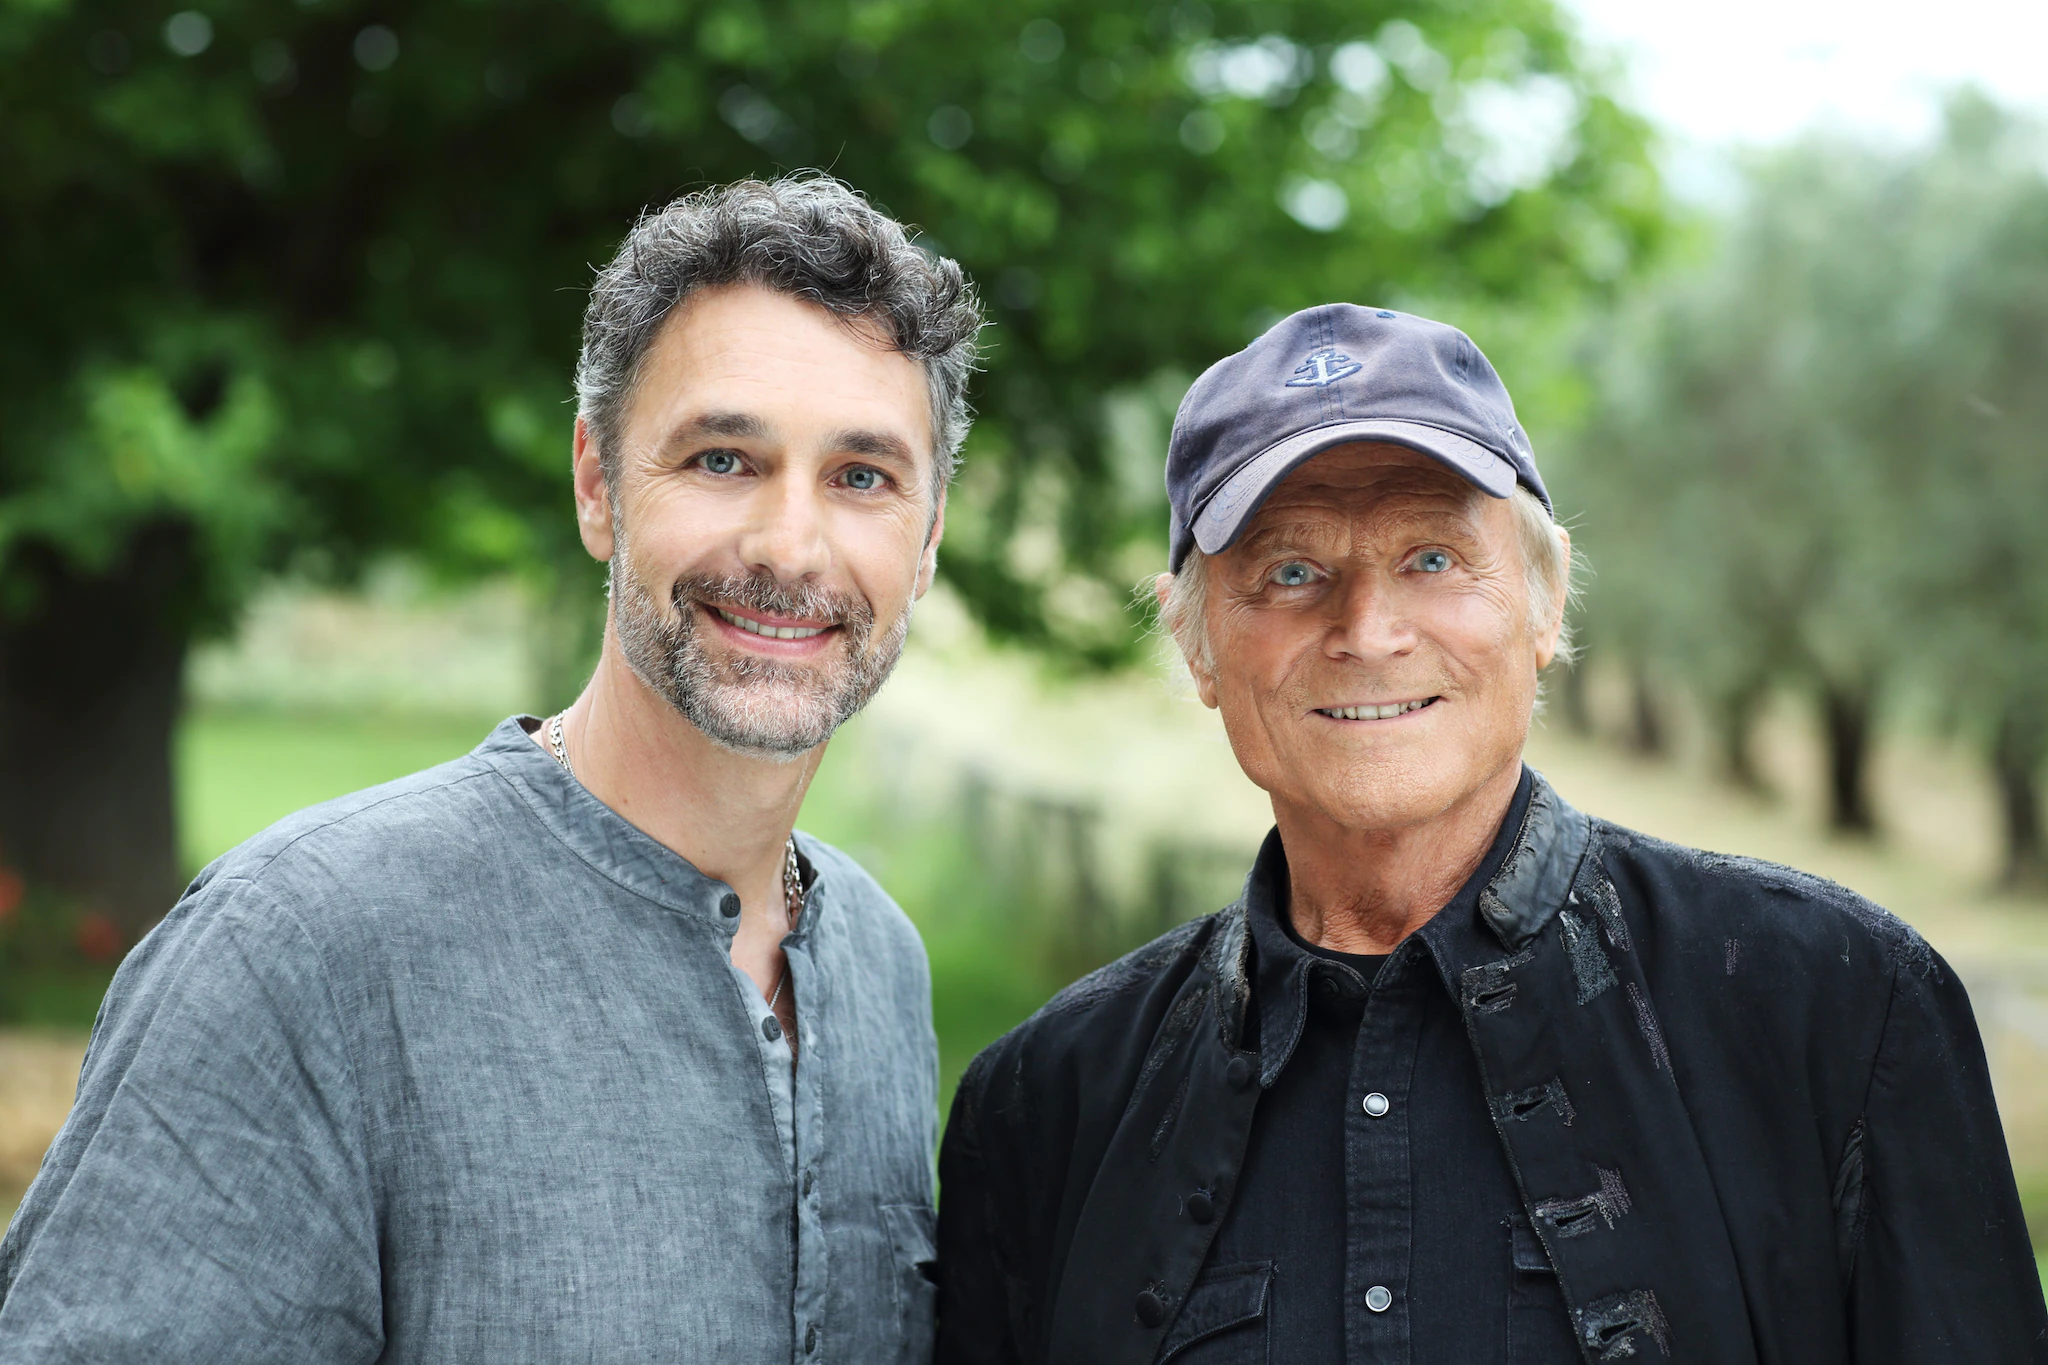 Raoul Bova and Terence Hill play Don Massimo and Don Matteo